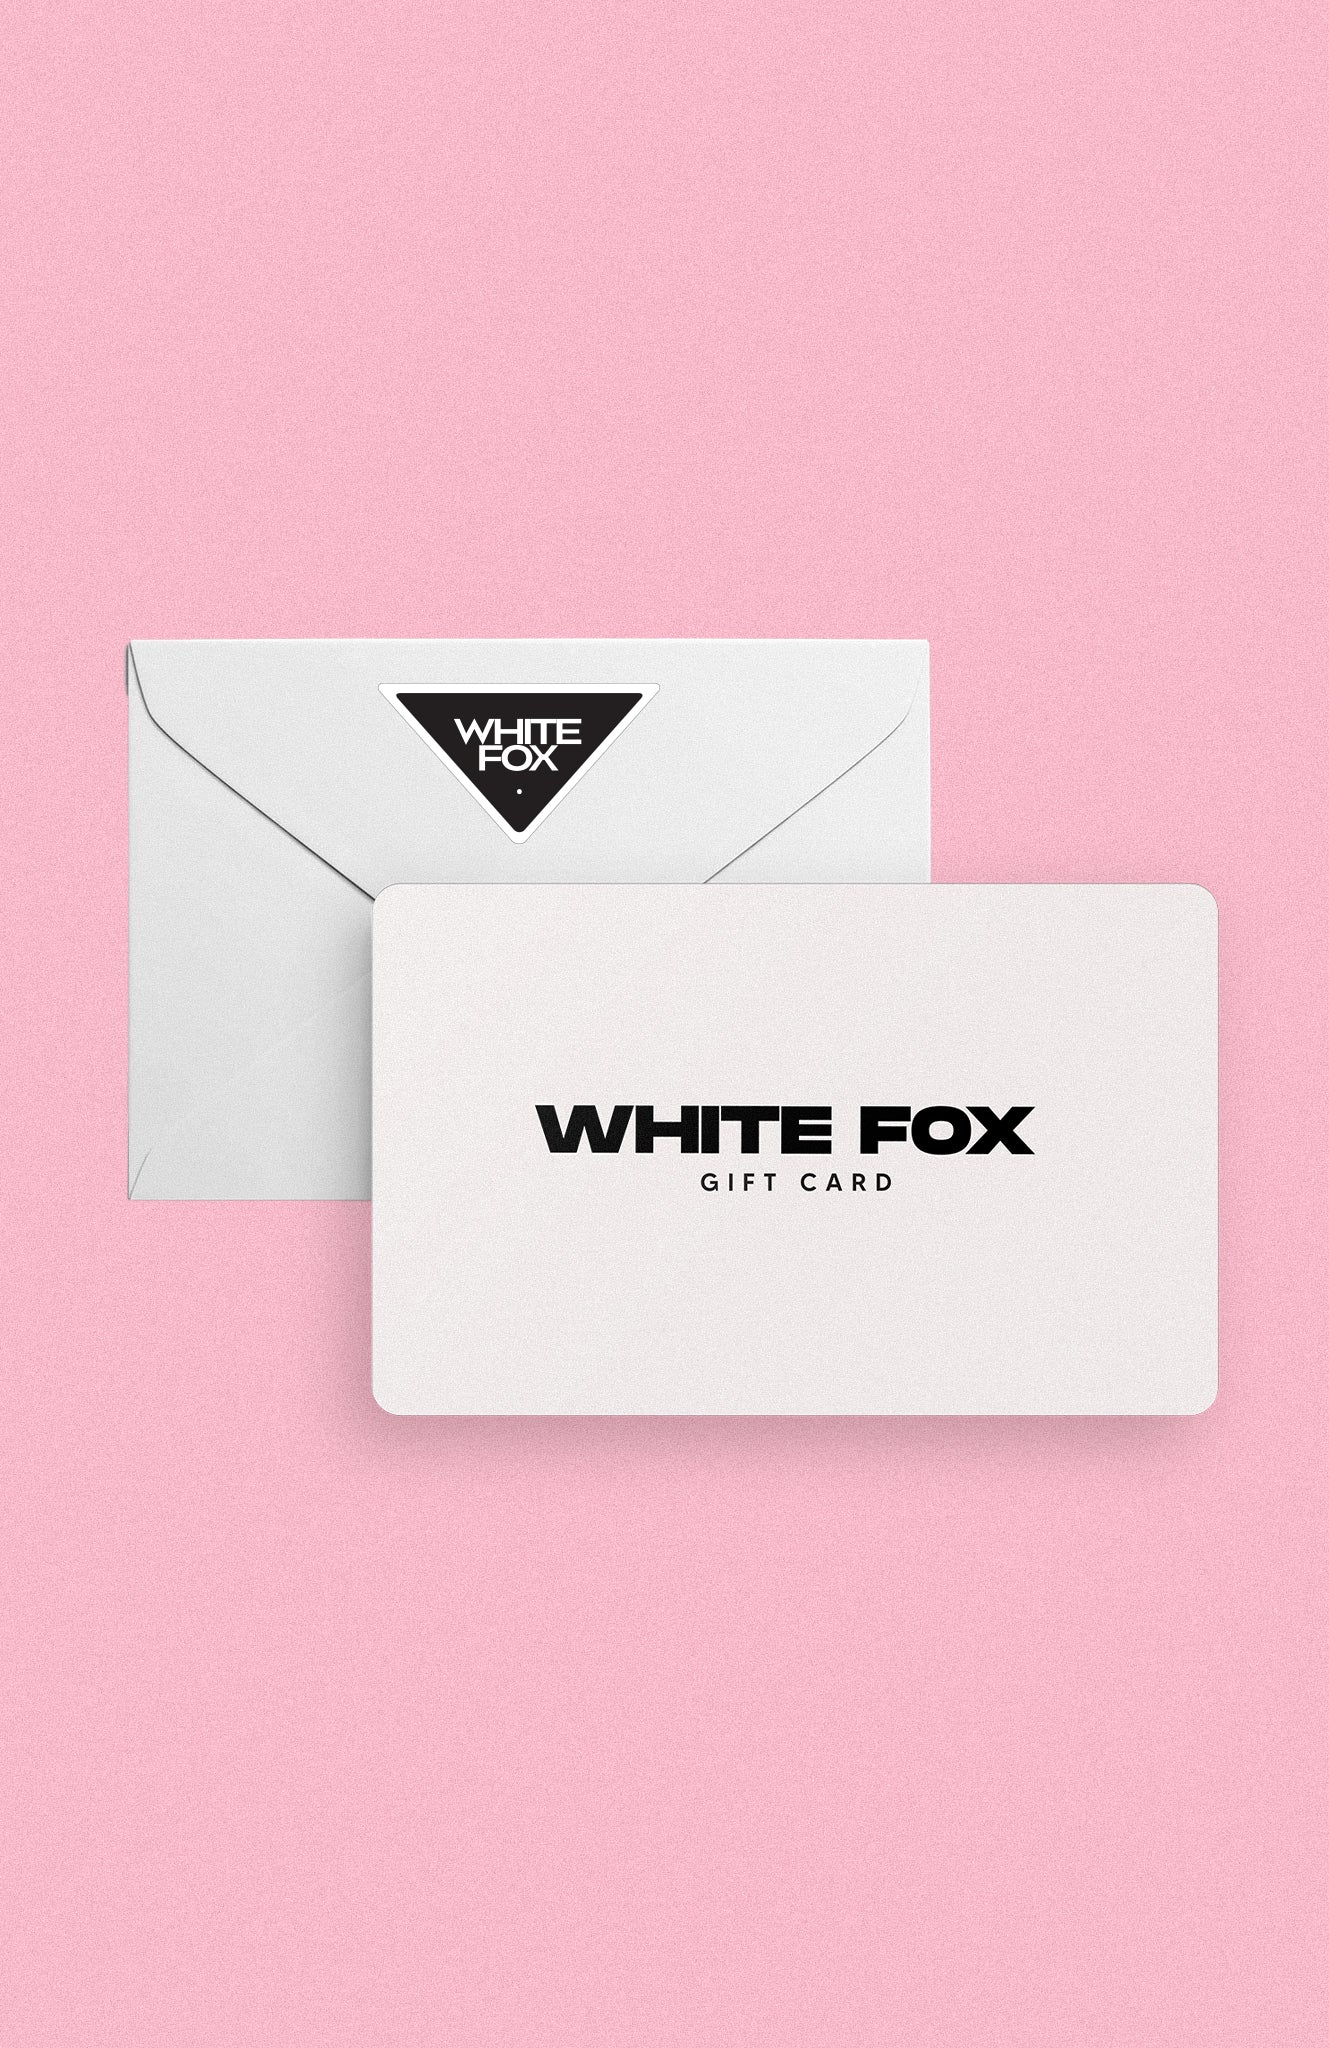 Card　Gift　White　Fox　Boutique